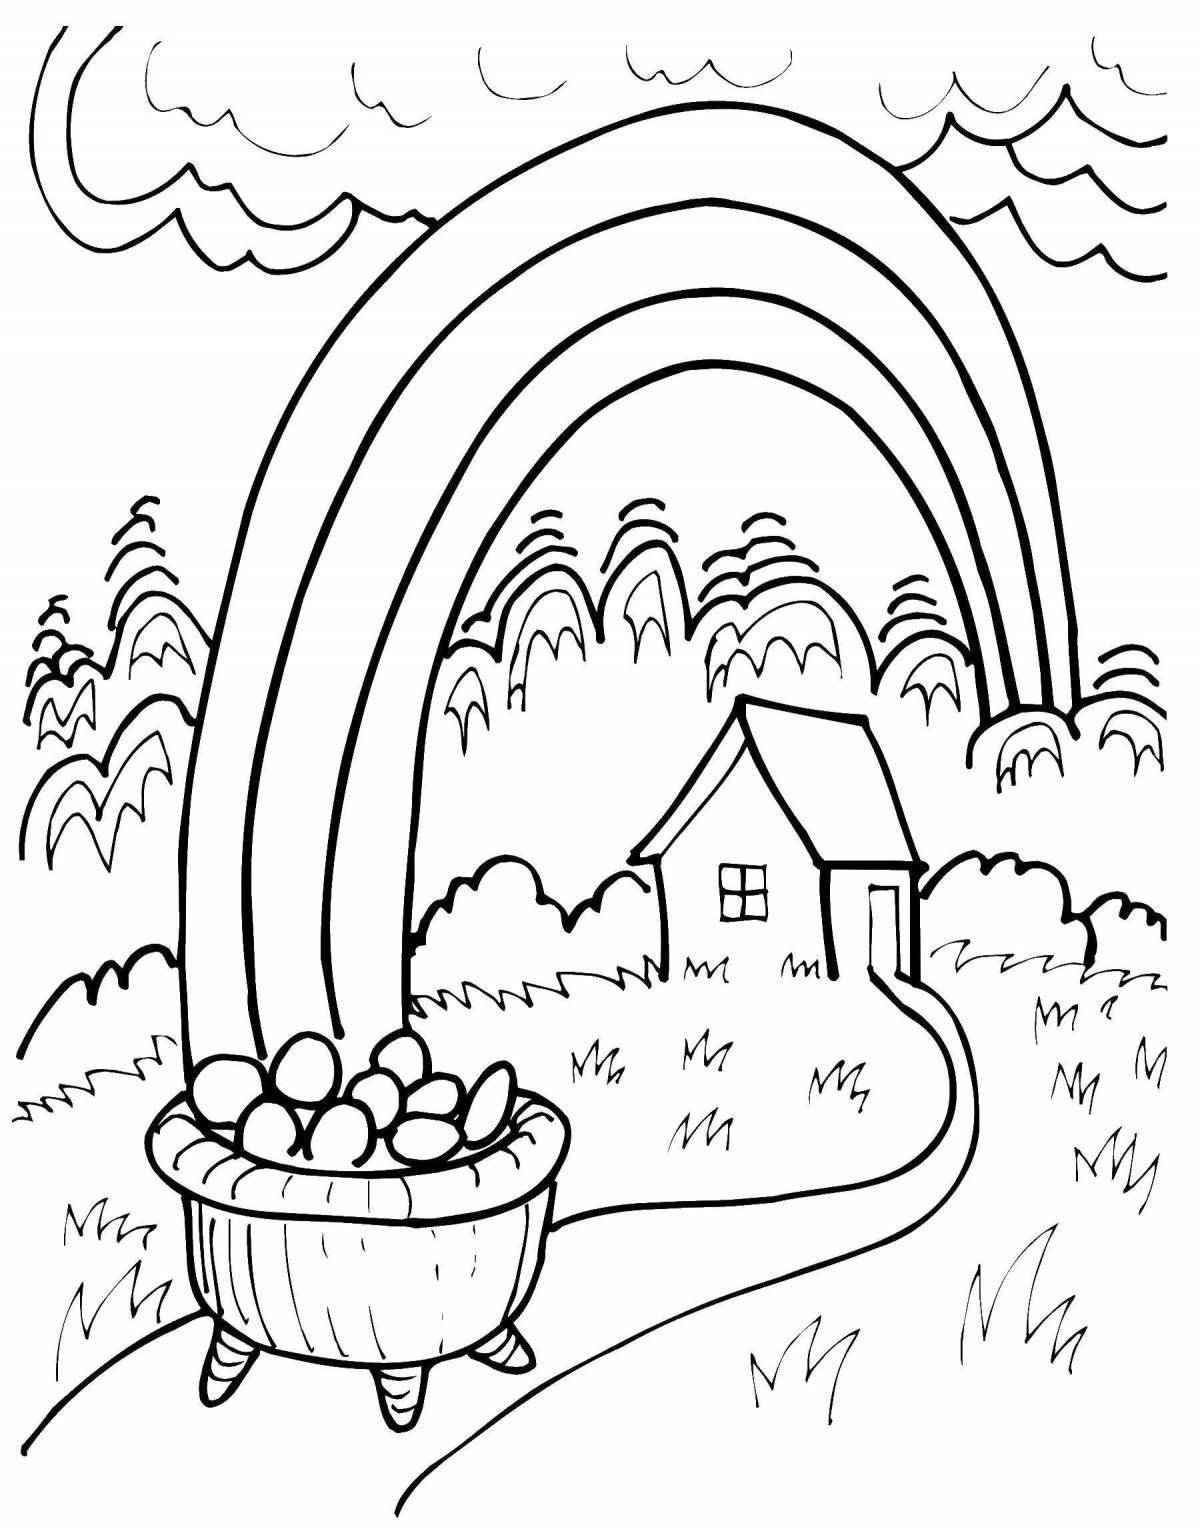 Great landscape for children 6-7 years old coloring book